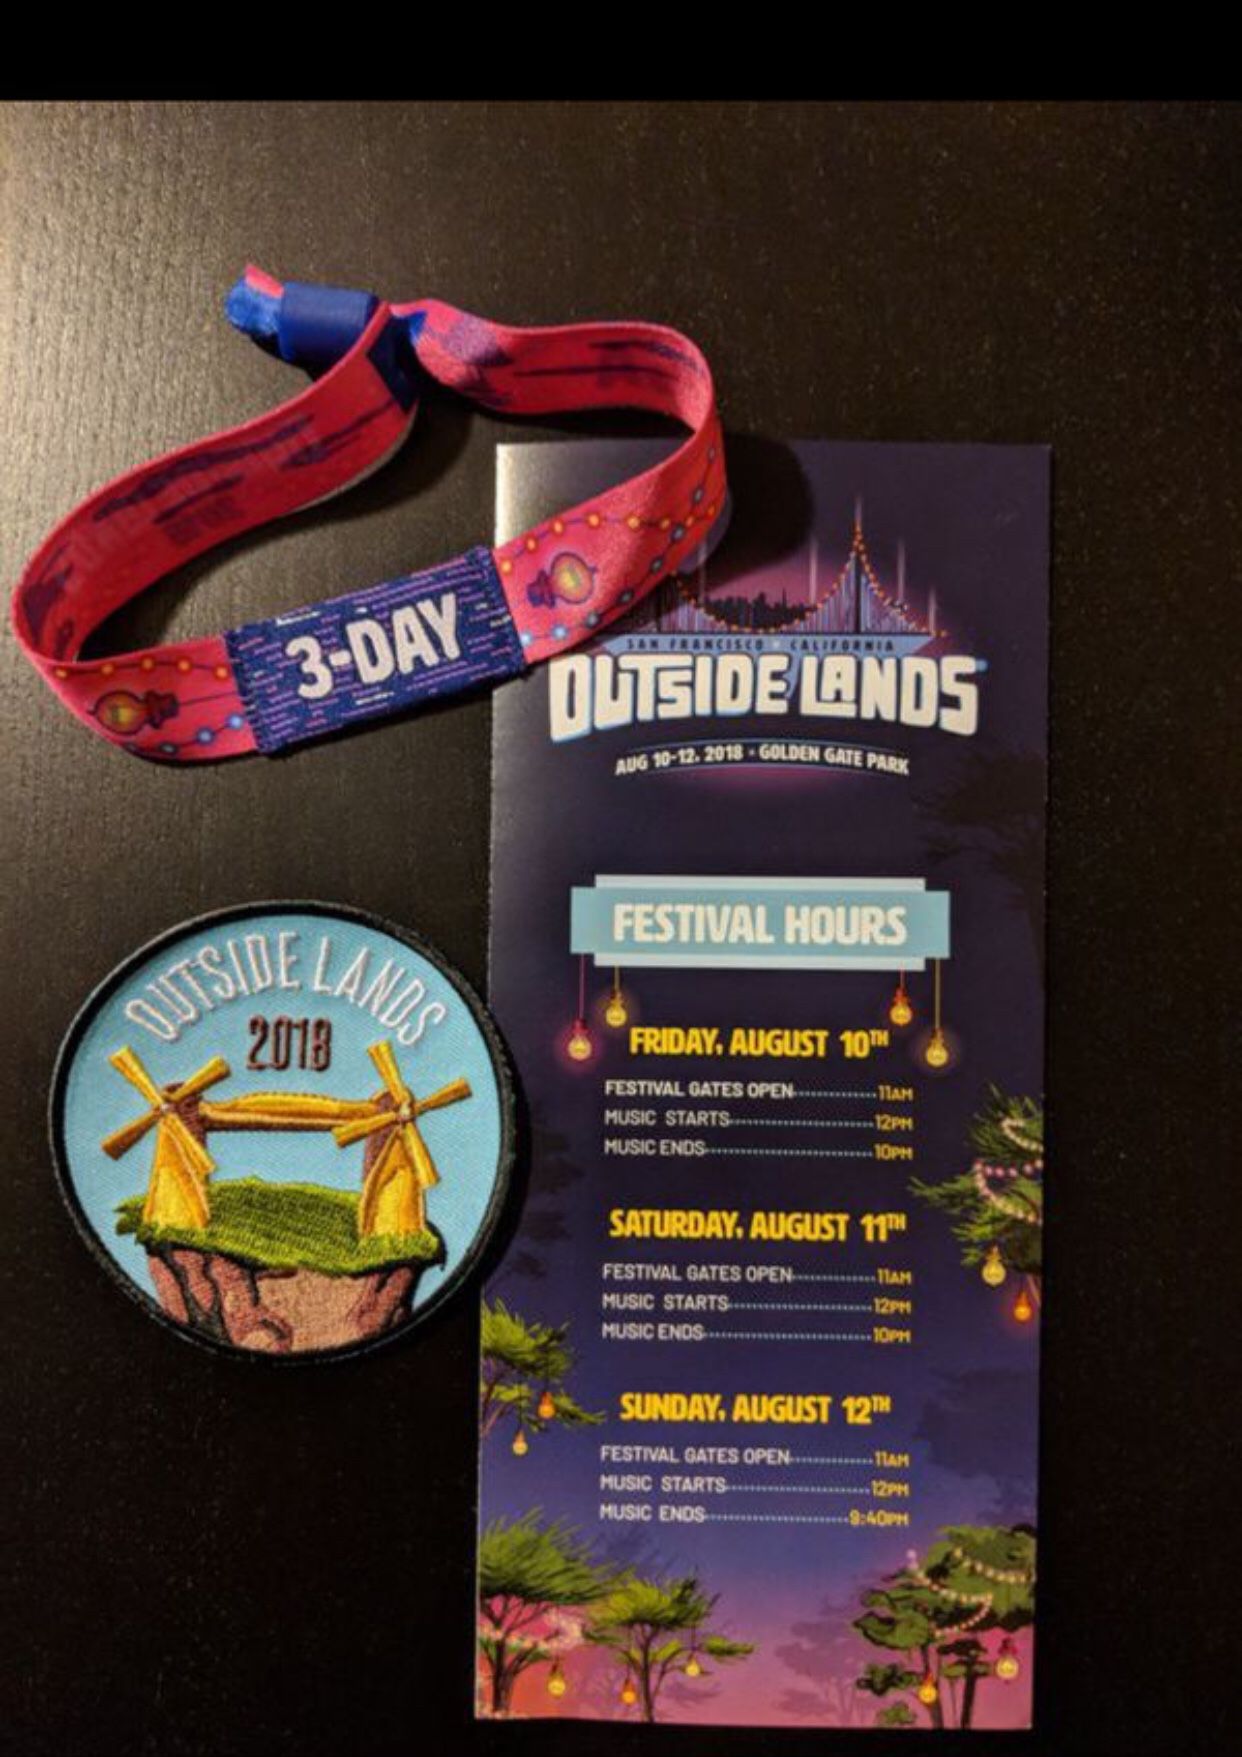 Outside lands ticket 3 day admission